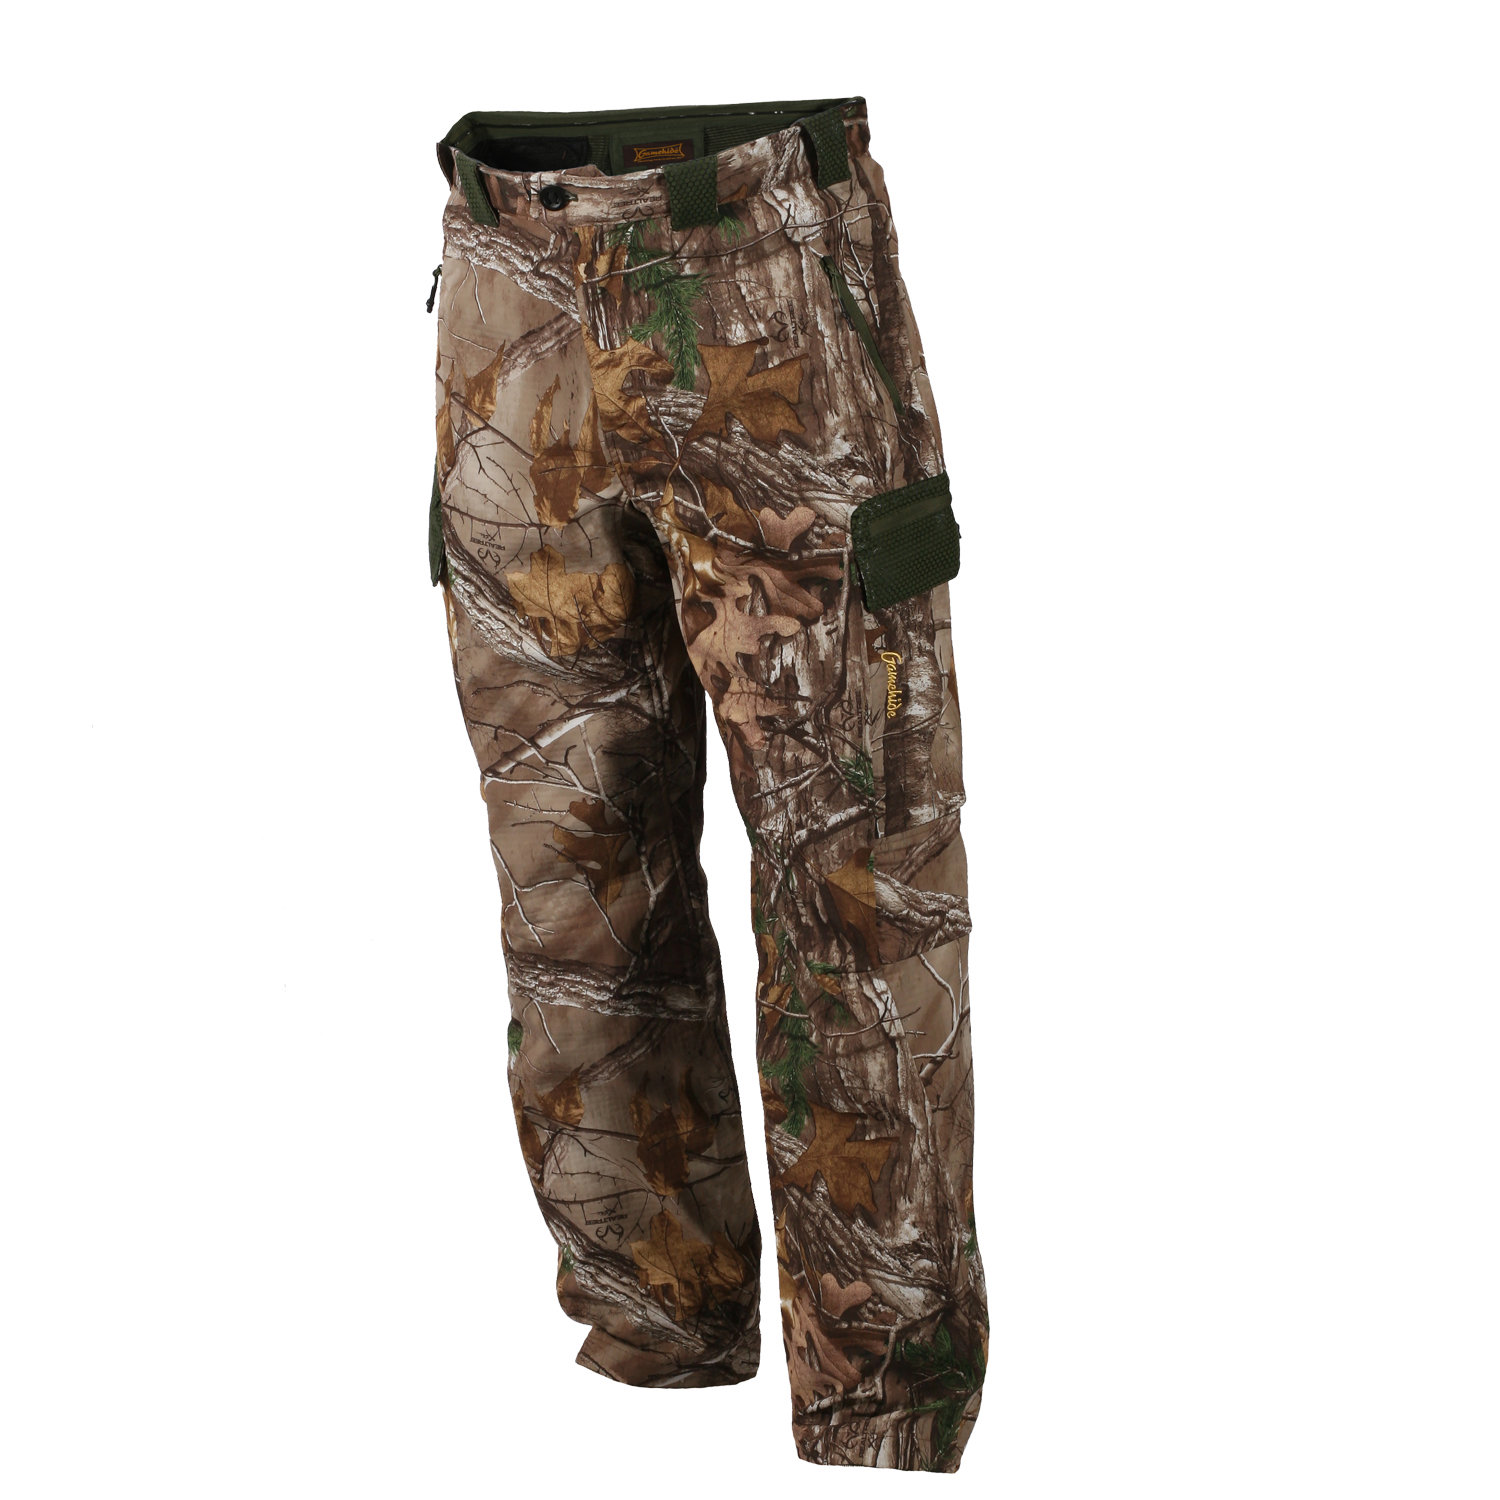 GAMEHIDE Insulated Woodsman Jean Pant Realtree Xtra » KYGUNCO